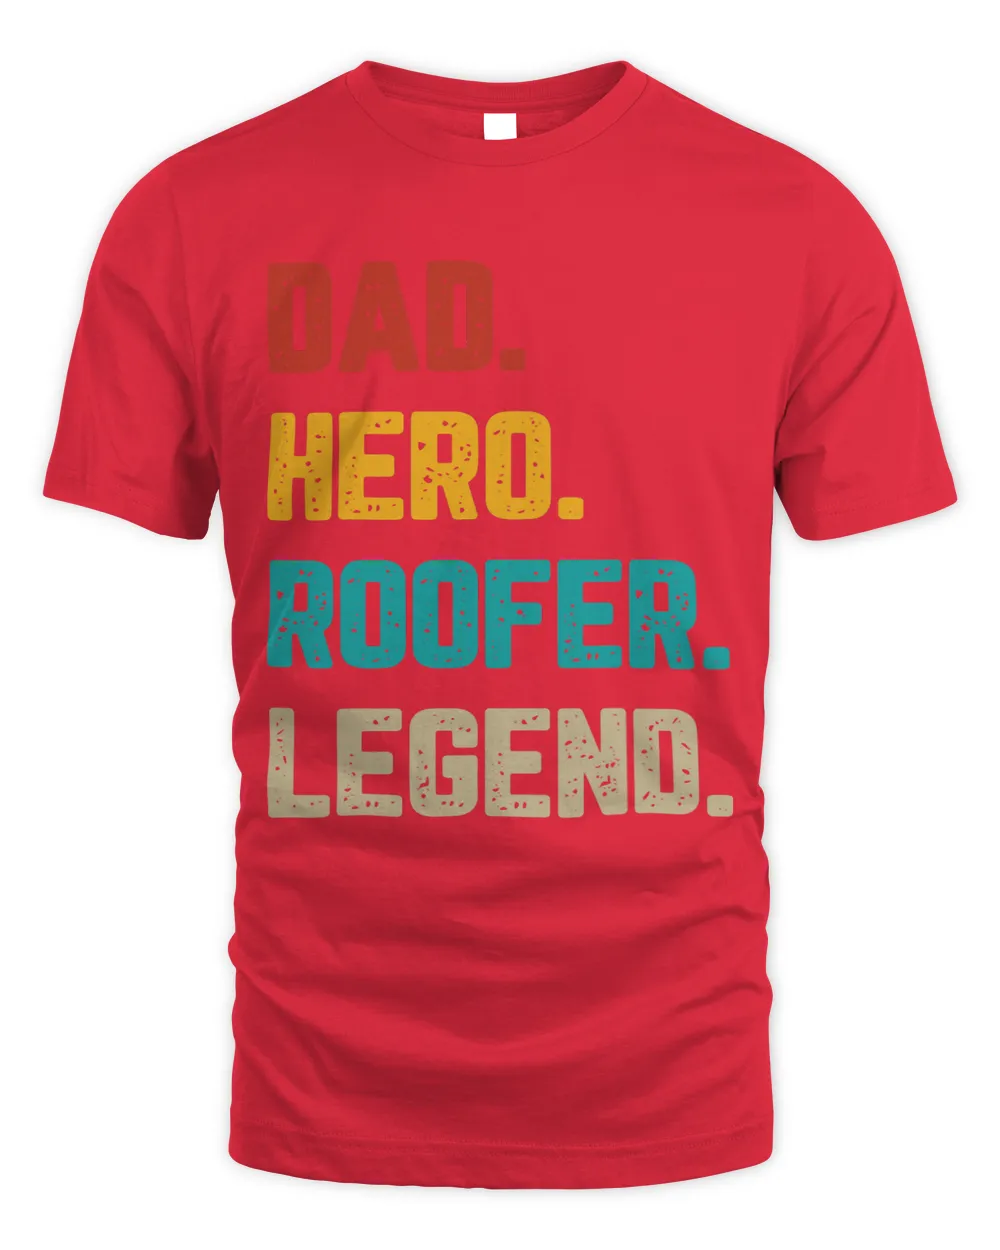 Roofing Father Dad Hero Roofer Legend Roofing Constructor